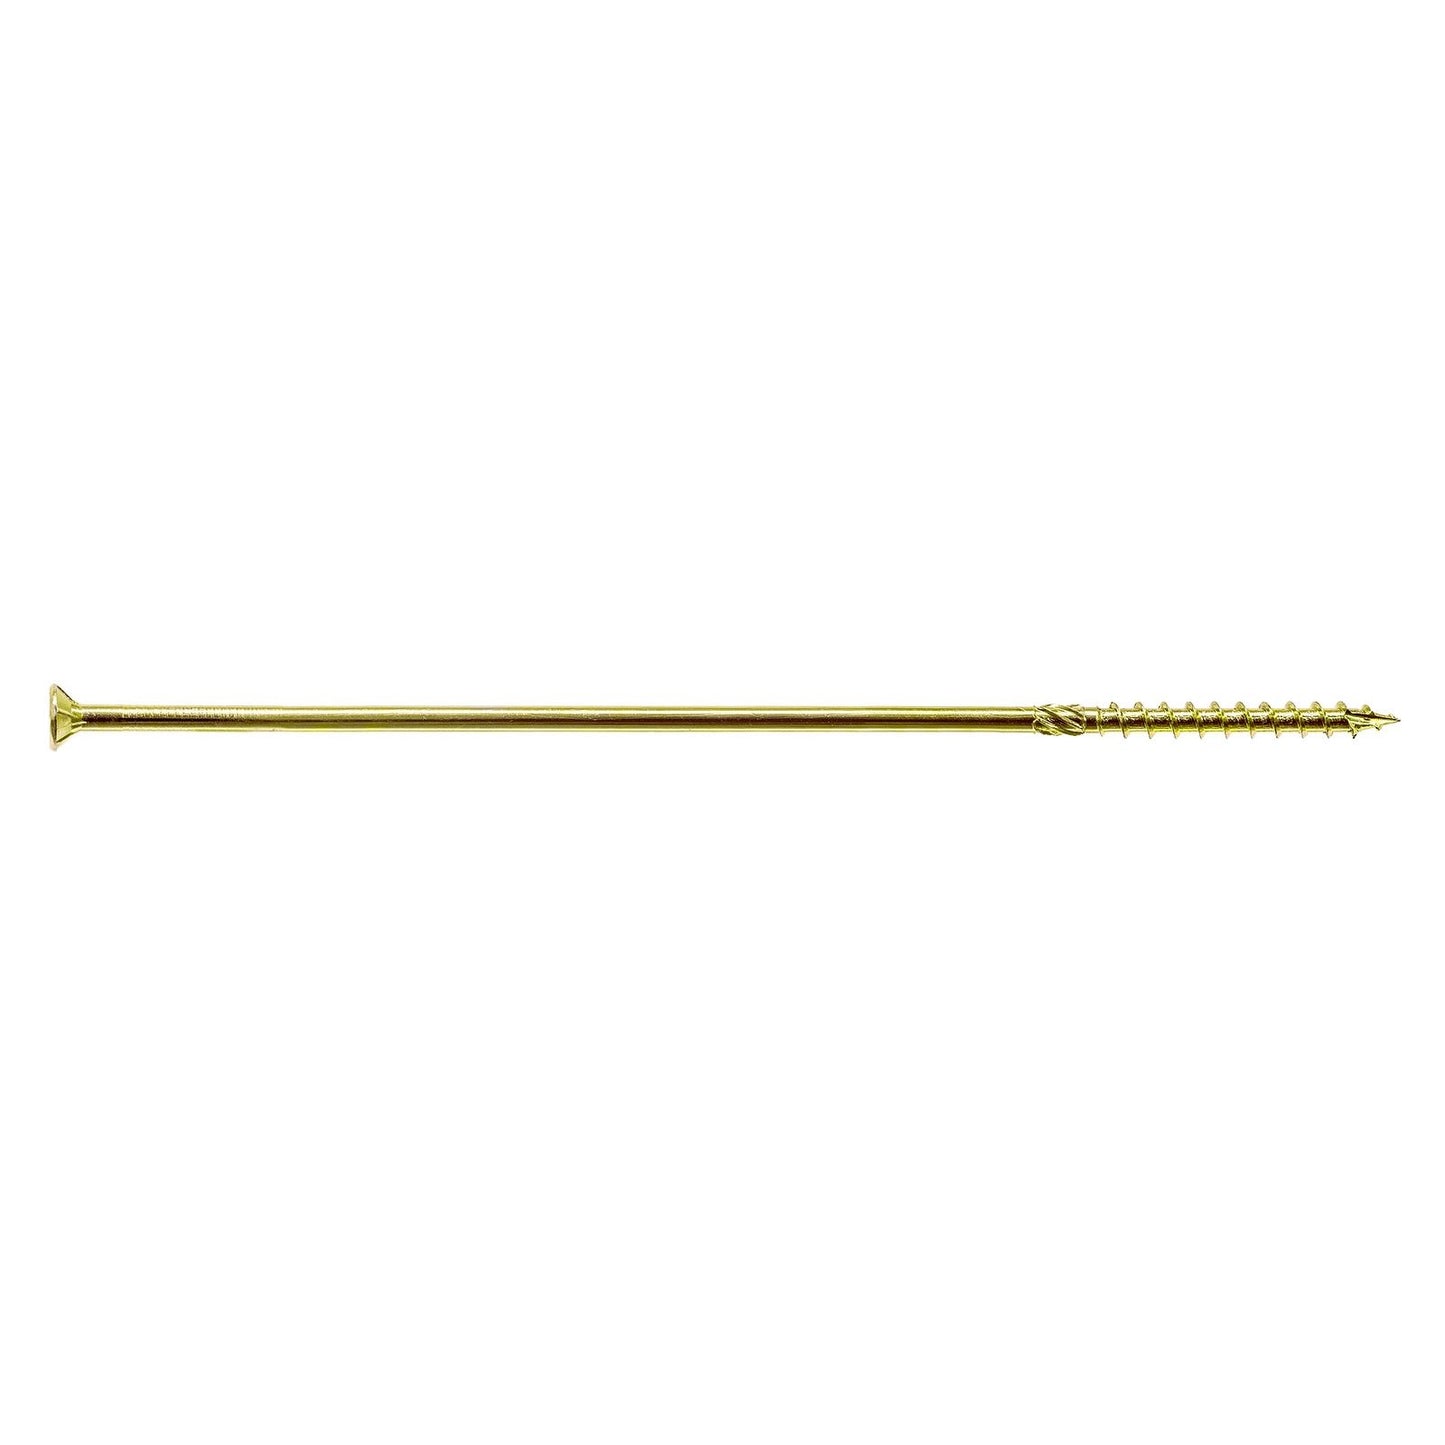 0.390" x 14" Strong-Drive SDCP Timber-CP Screw - Yellow Zinc, Pkg 25